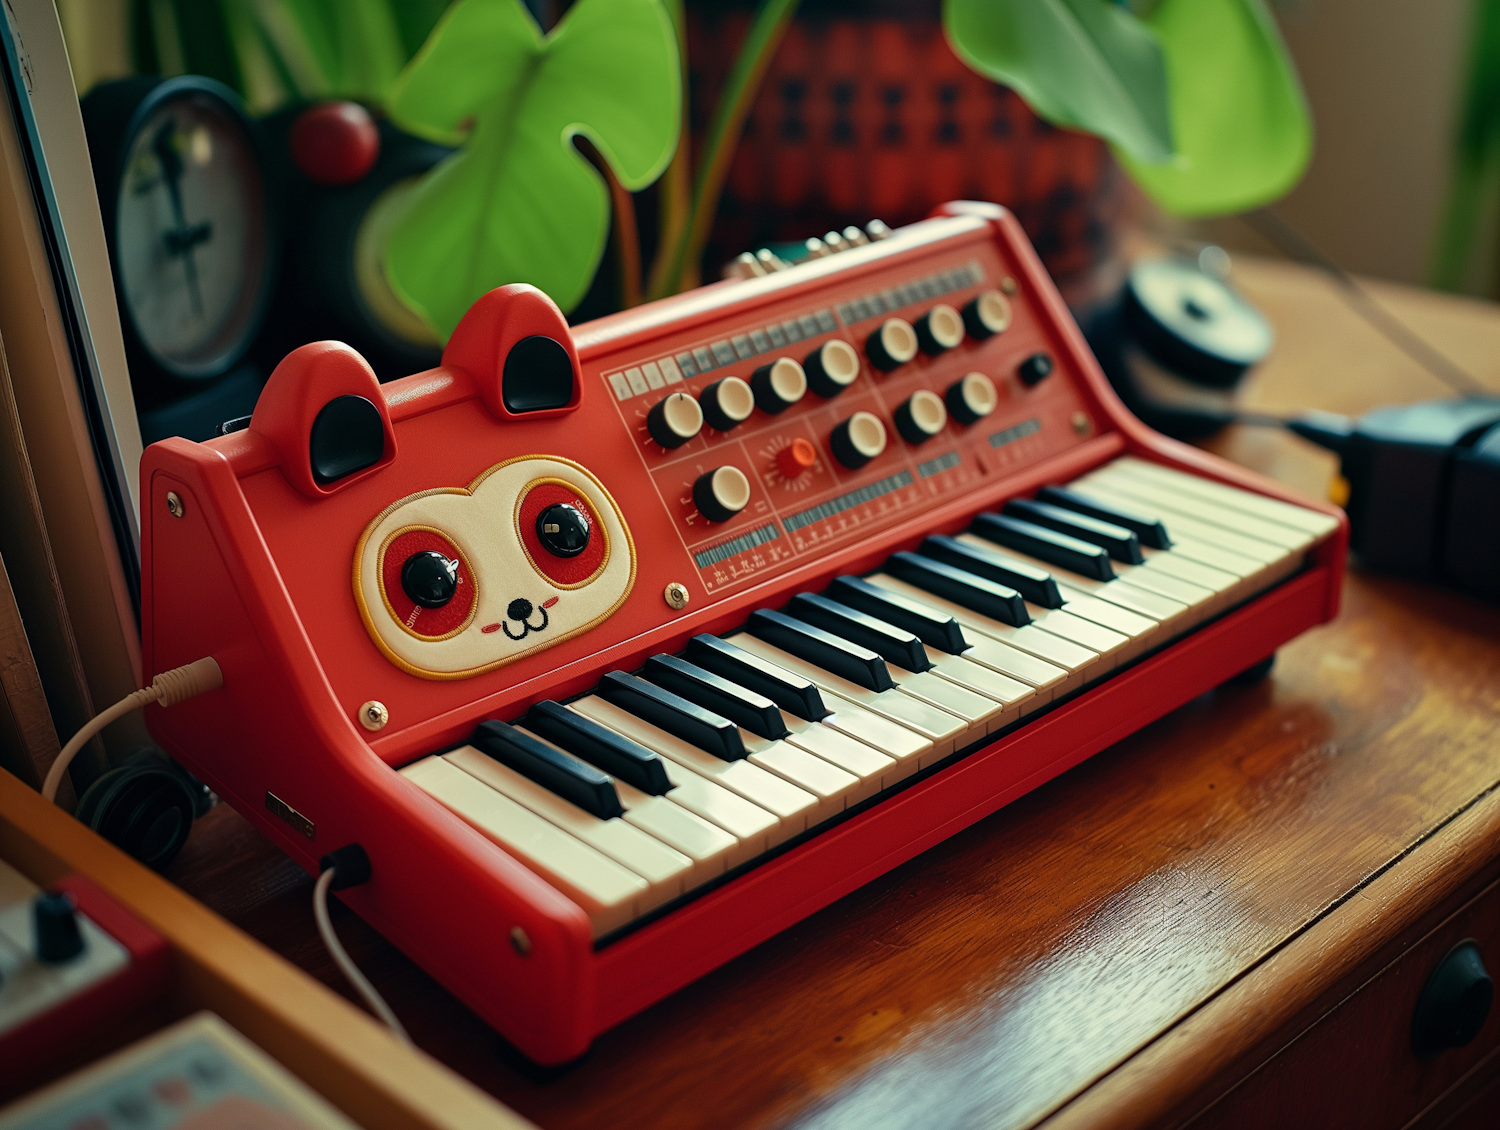 Red Panda Toy Synthesizer